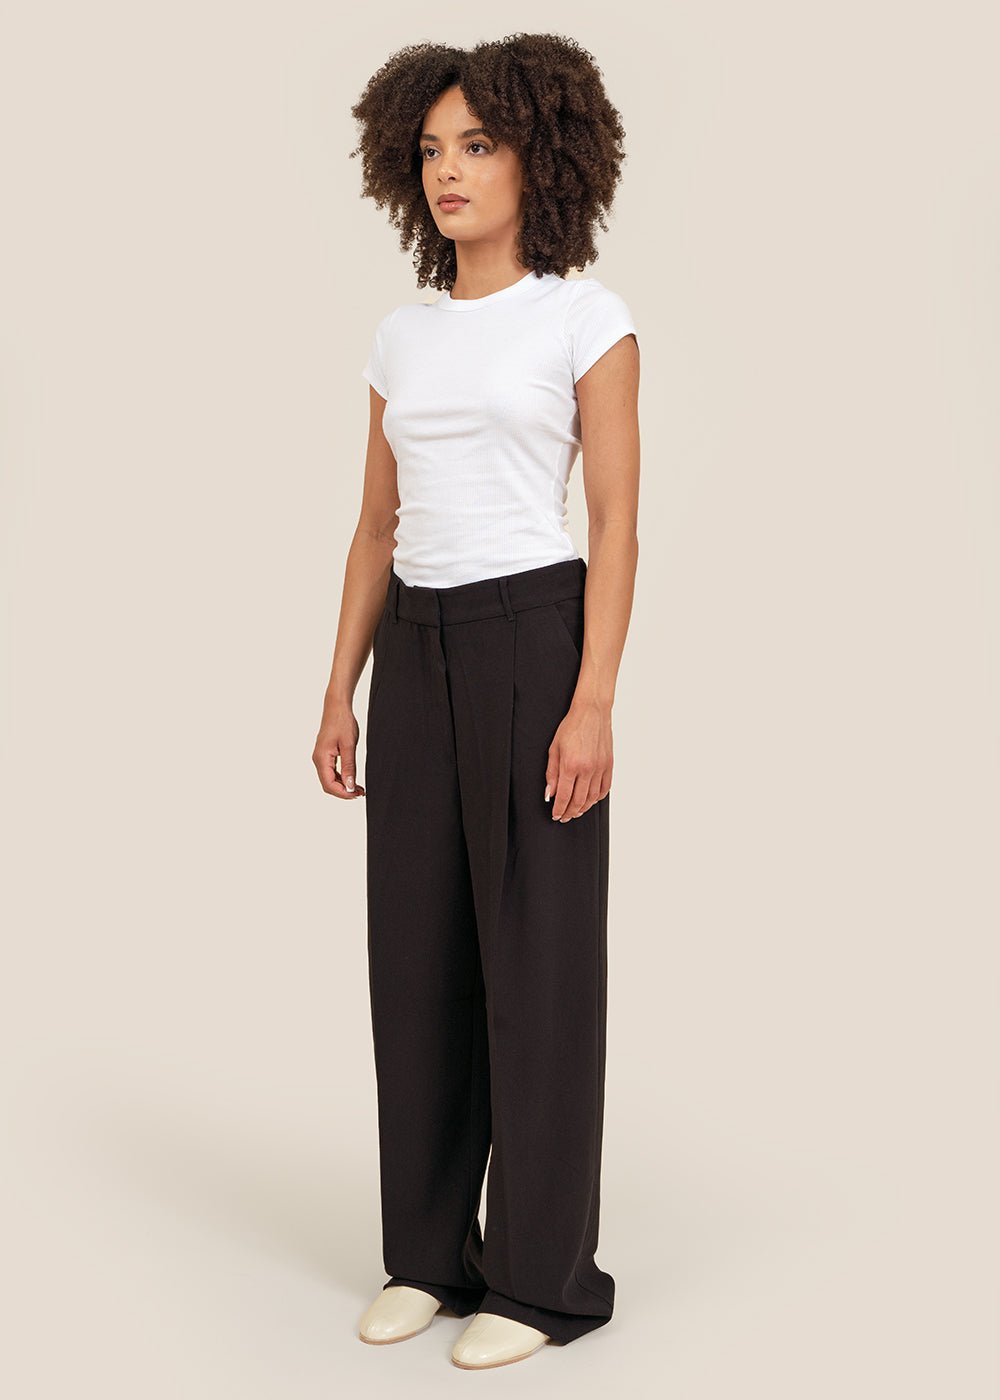 Stylein Black Brunella Trousers - New Classics Studios Sustainable Ethical Fashion Canada